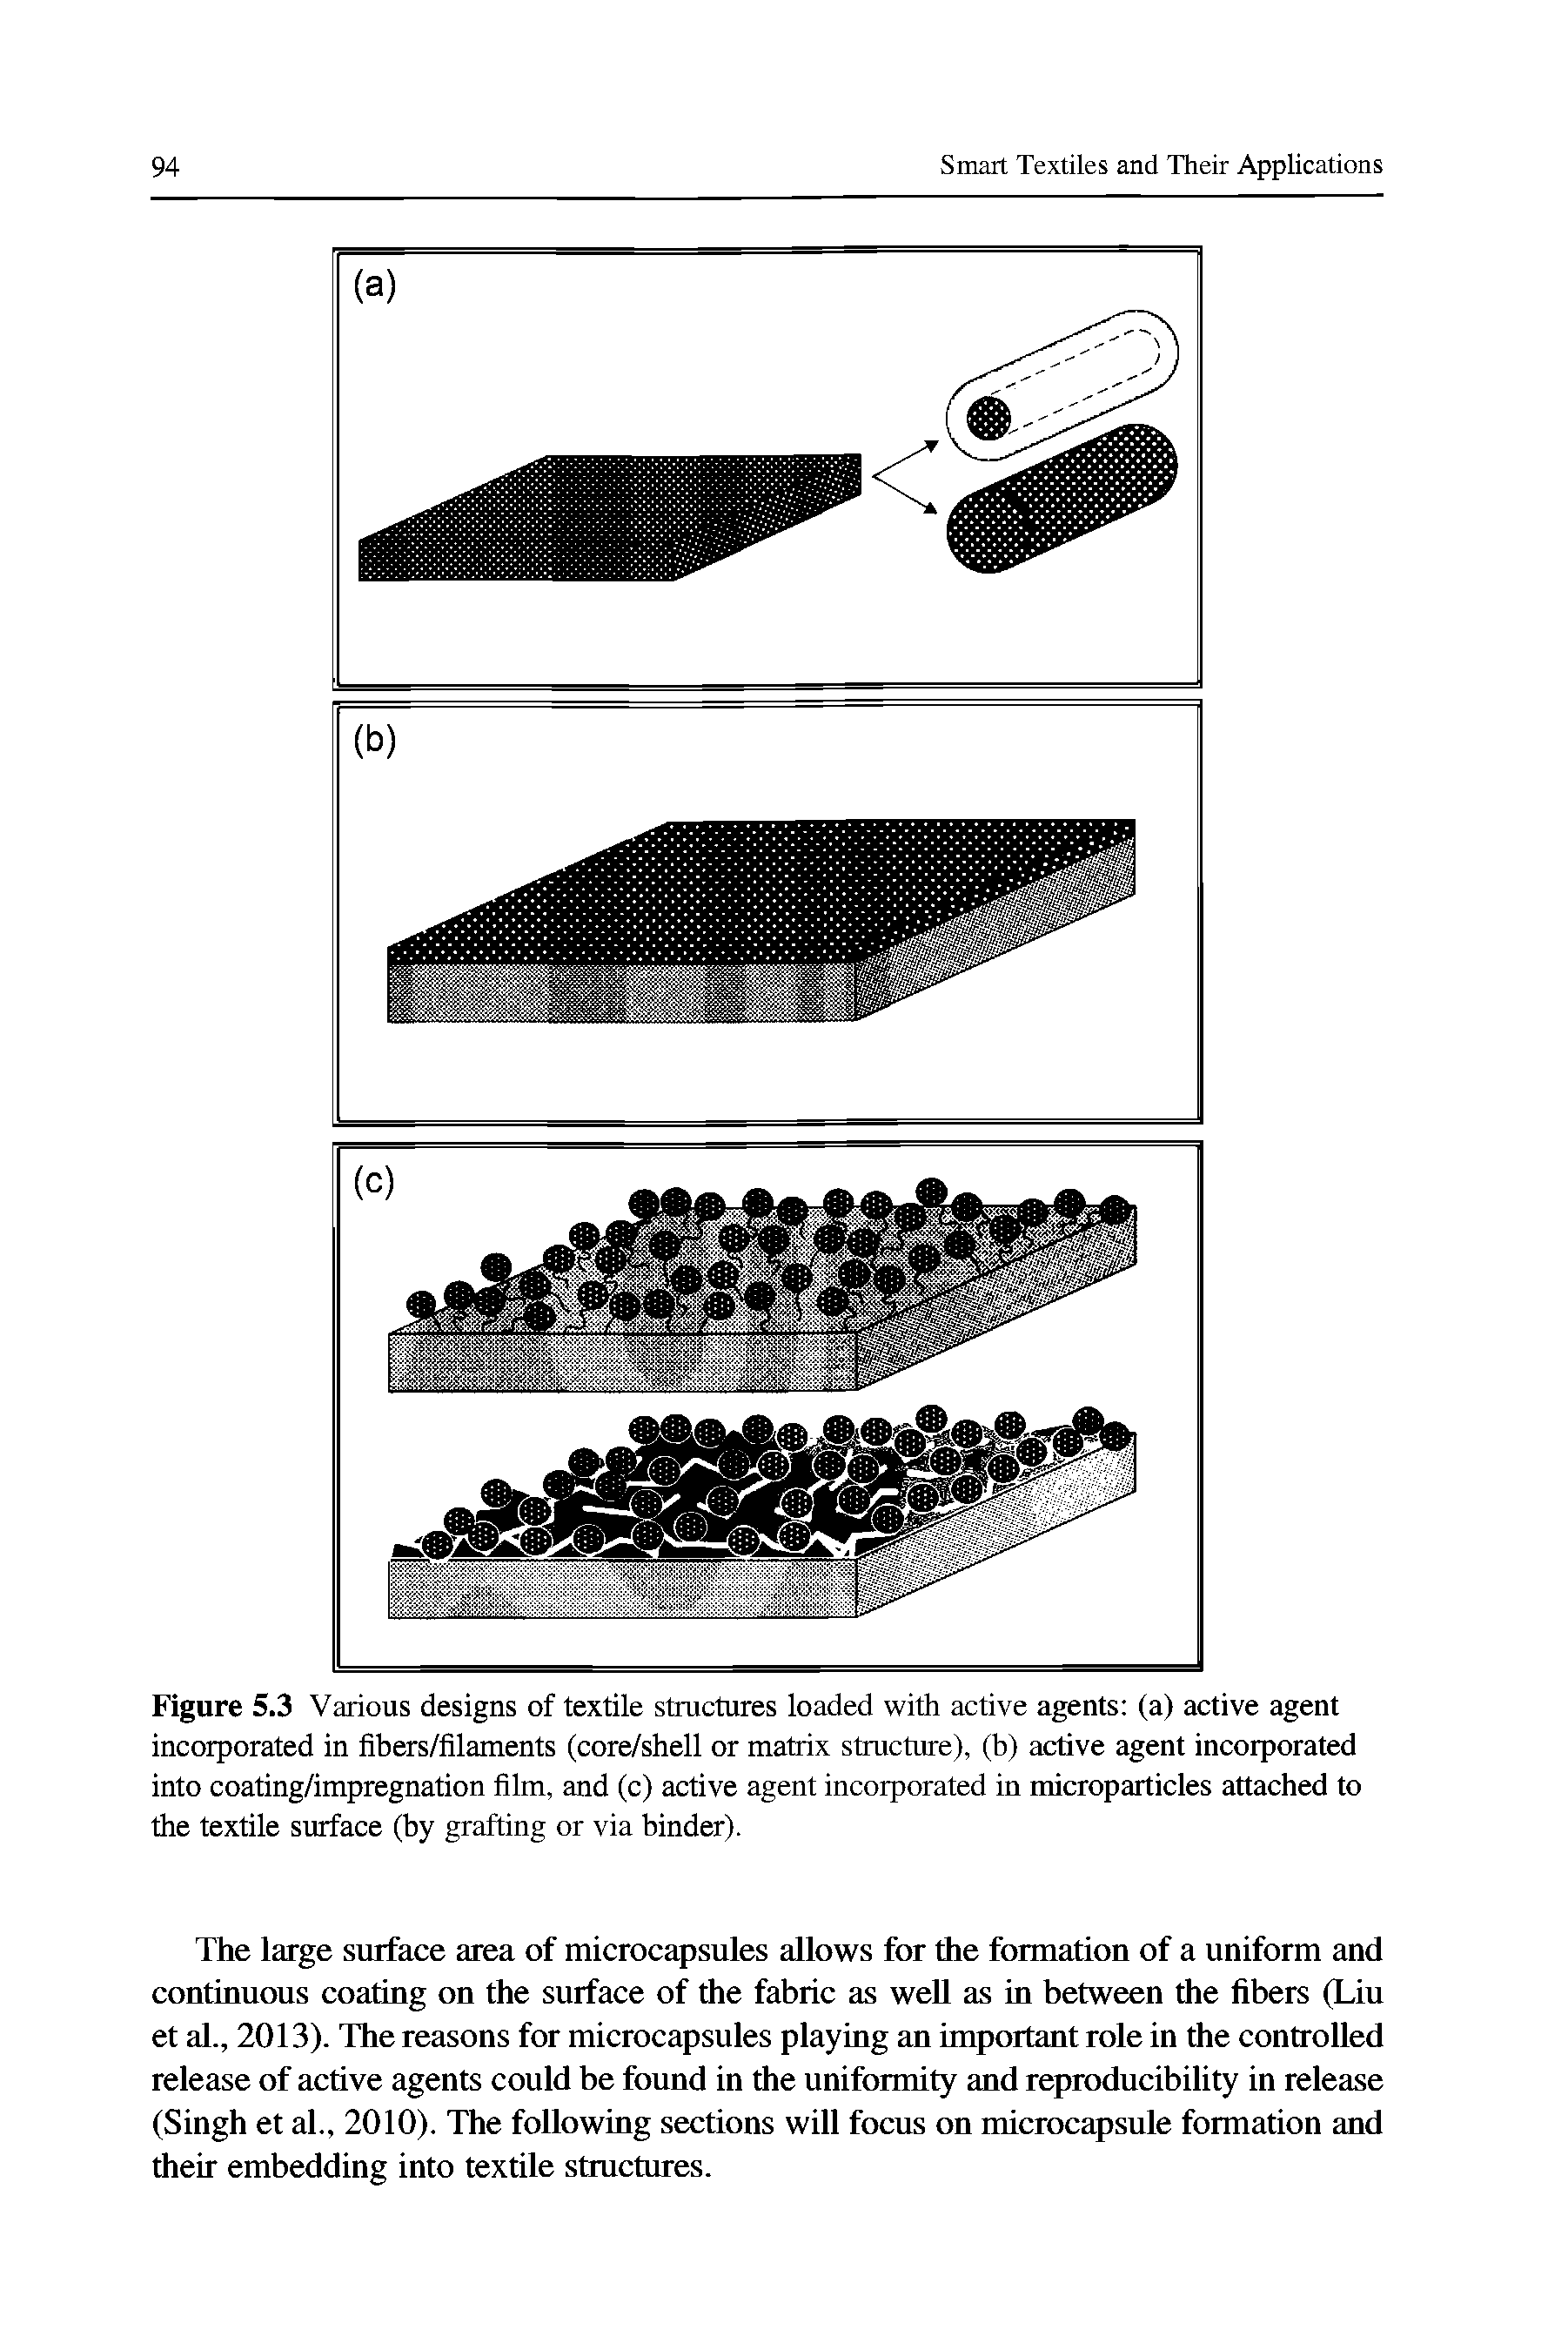 Figure 5.3 Various designs of textile structures loaded with active agents (a) active agent incorporated in fibers/filaments (core/shell or matrix structure), (b) active agent incorporated into coating/impregnation film, and (c) active agent incorporated in microparticles attached to the textile surface (by grafting or via binder).